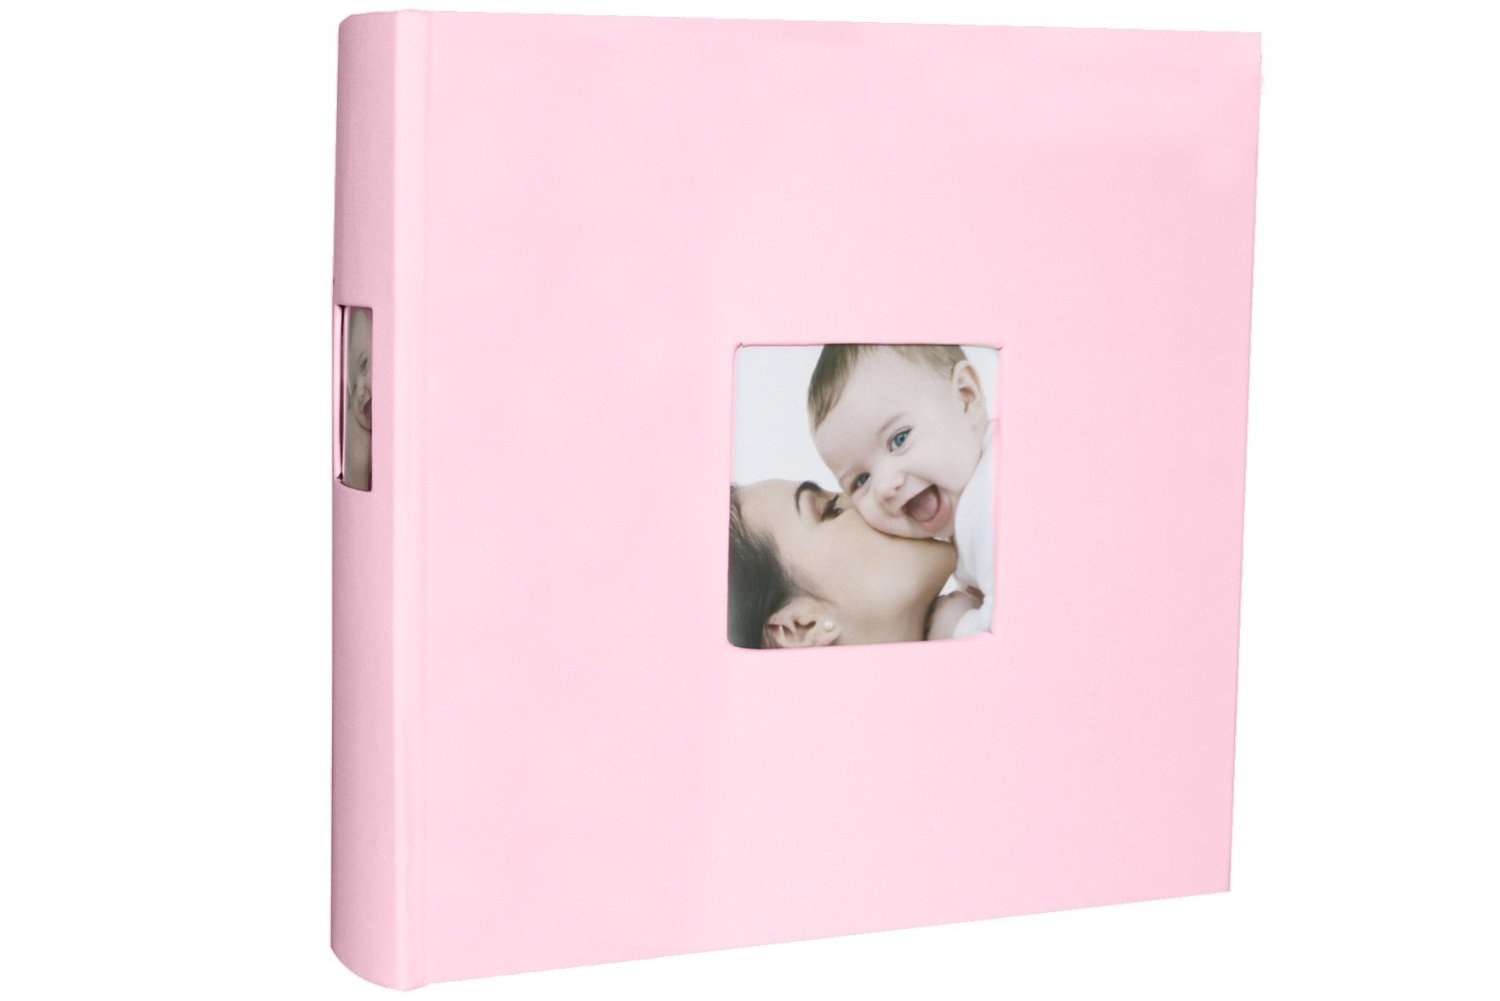 Babuqee Pink Baby Photo Album 200 Photos 102 x 153mm RRP 14.99 CLEARANCE XL 9.99